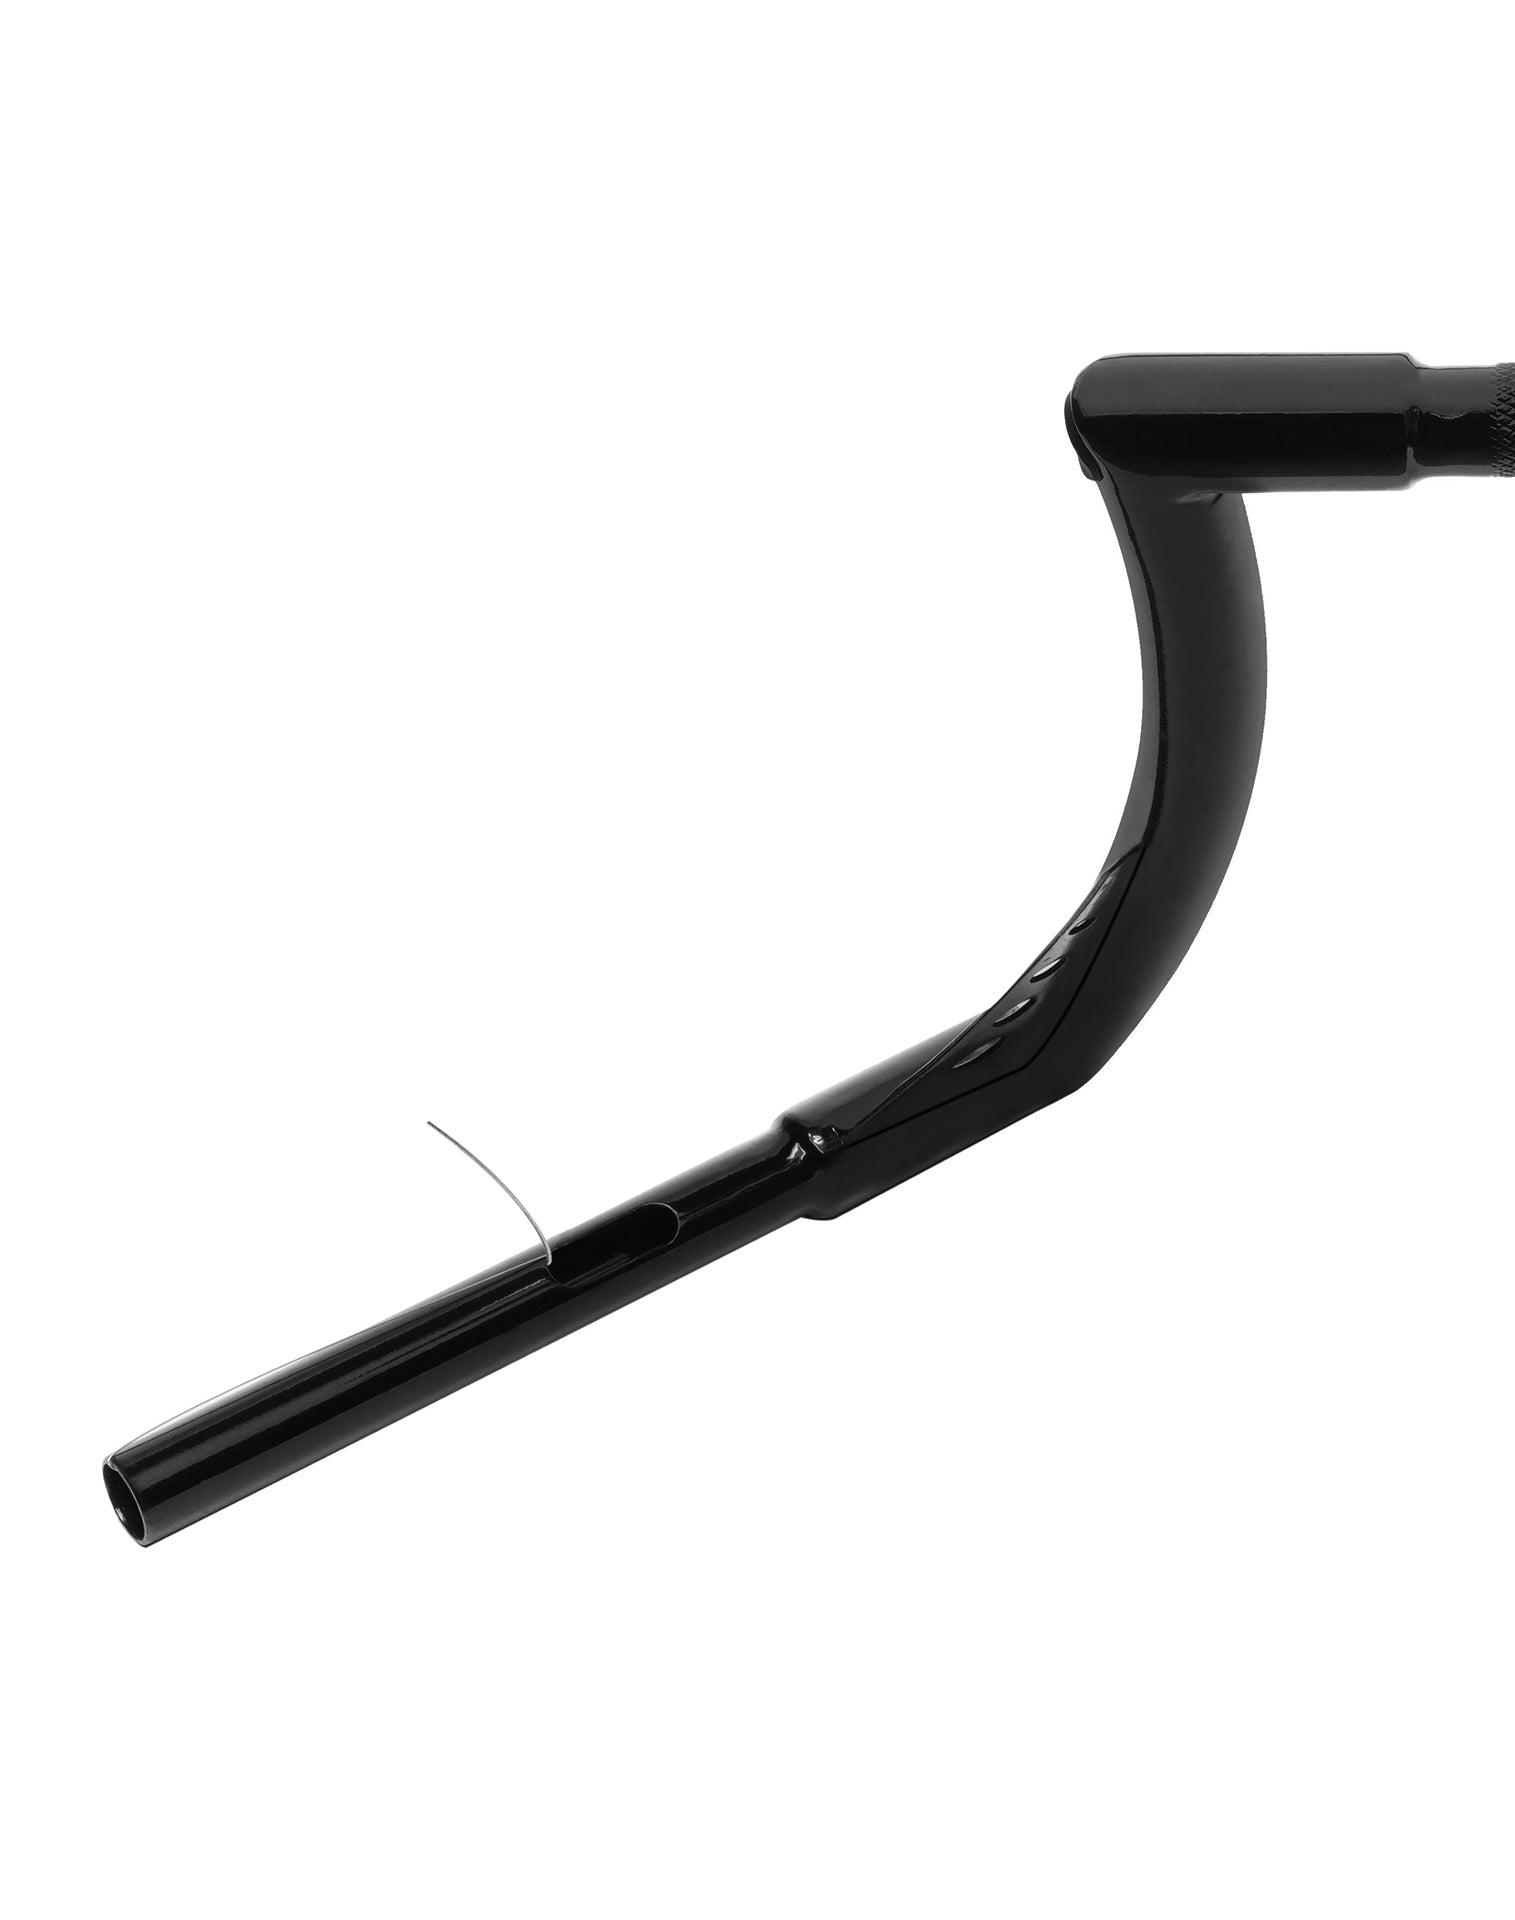 Viking Iron Born 12" Handlebar For Harley Sportster Forty Eight Gloss Black Close Up View